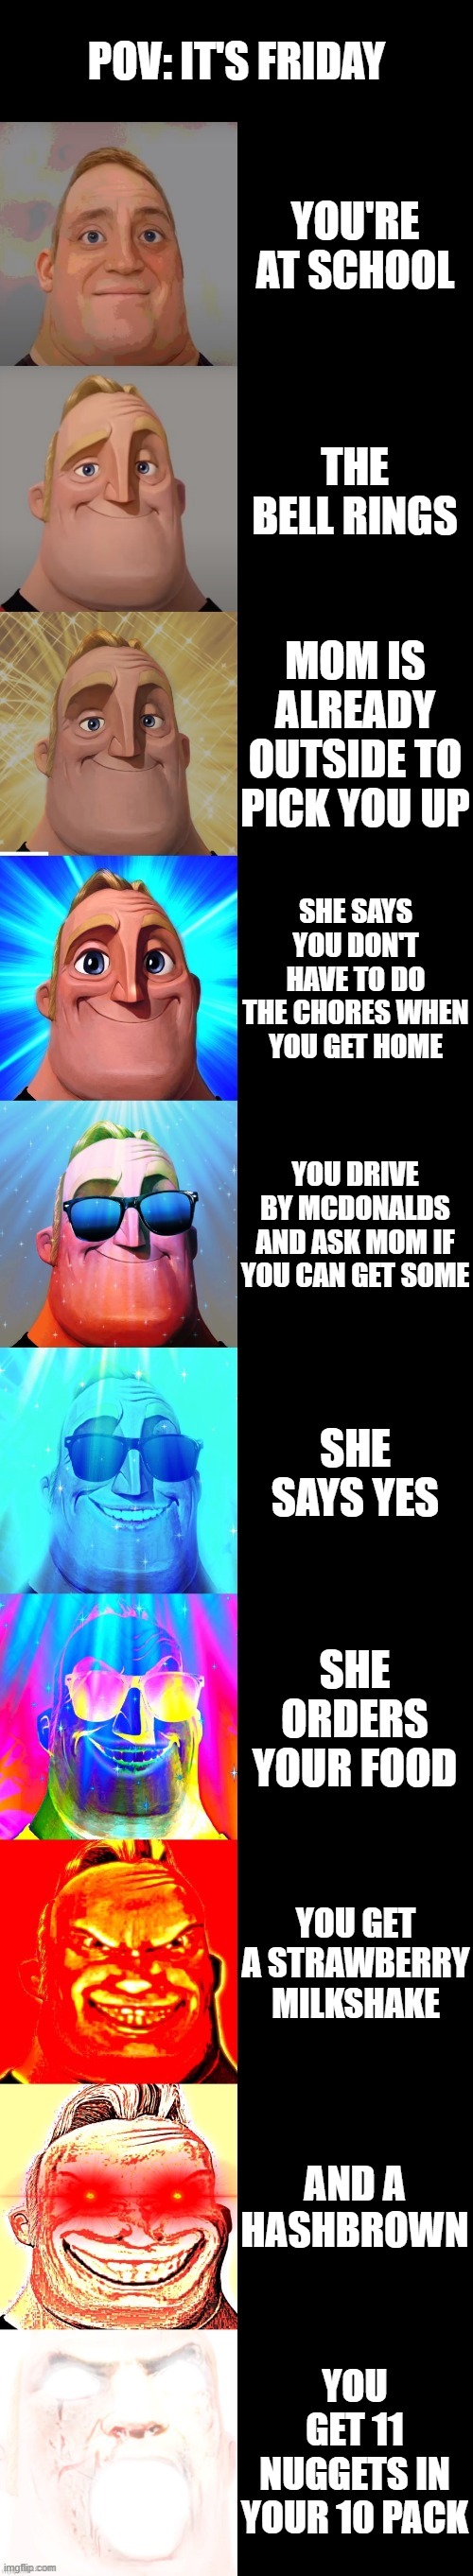 mr incredible becoming canny | POV: IT'S FRIDAY; YOU'RE AT SCHOOL; THE BELL RINGS; MOM IS ALREADY OUTSIDE TO PICK YOU UP; SHE SAYS YOU DON'T HAVE TO DO THE CHORES WHEN YOU GET HOME; YOU DRIVE BY MCDONALDS AND ASK MOM IF YOU CAN GET SOME; SHE SAYS YES; SHE ORDERS YOUR FOOD; YOU GET A STRAWBERRY MILKSHAKE; AND A HASHBROWN; YOU GET 11 NUGGETS IN YOUR 10 PACK | image tagged in mr incredible becoming canny | made w/ Imgflip meme maker